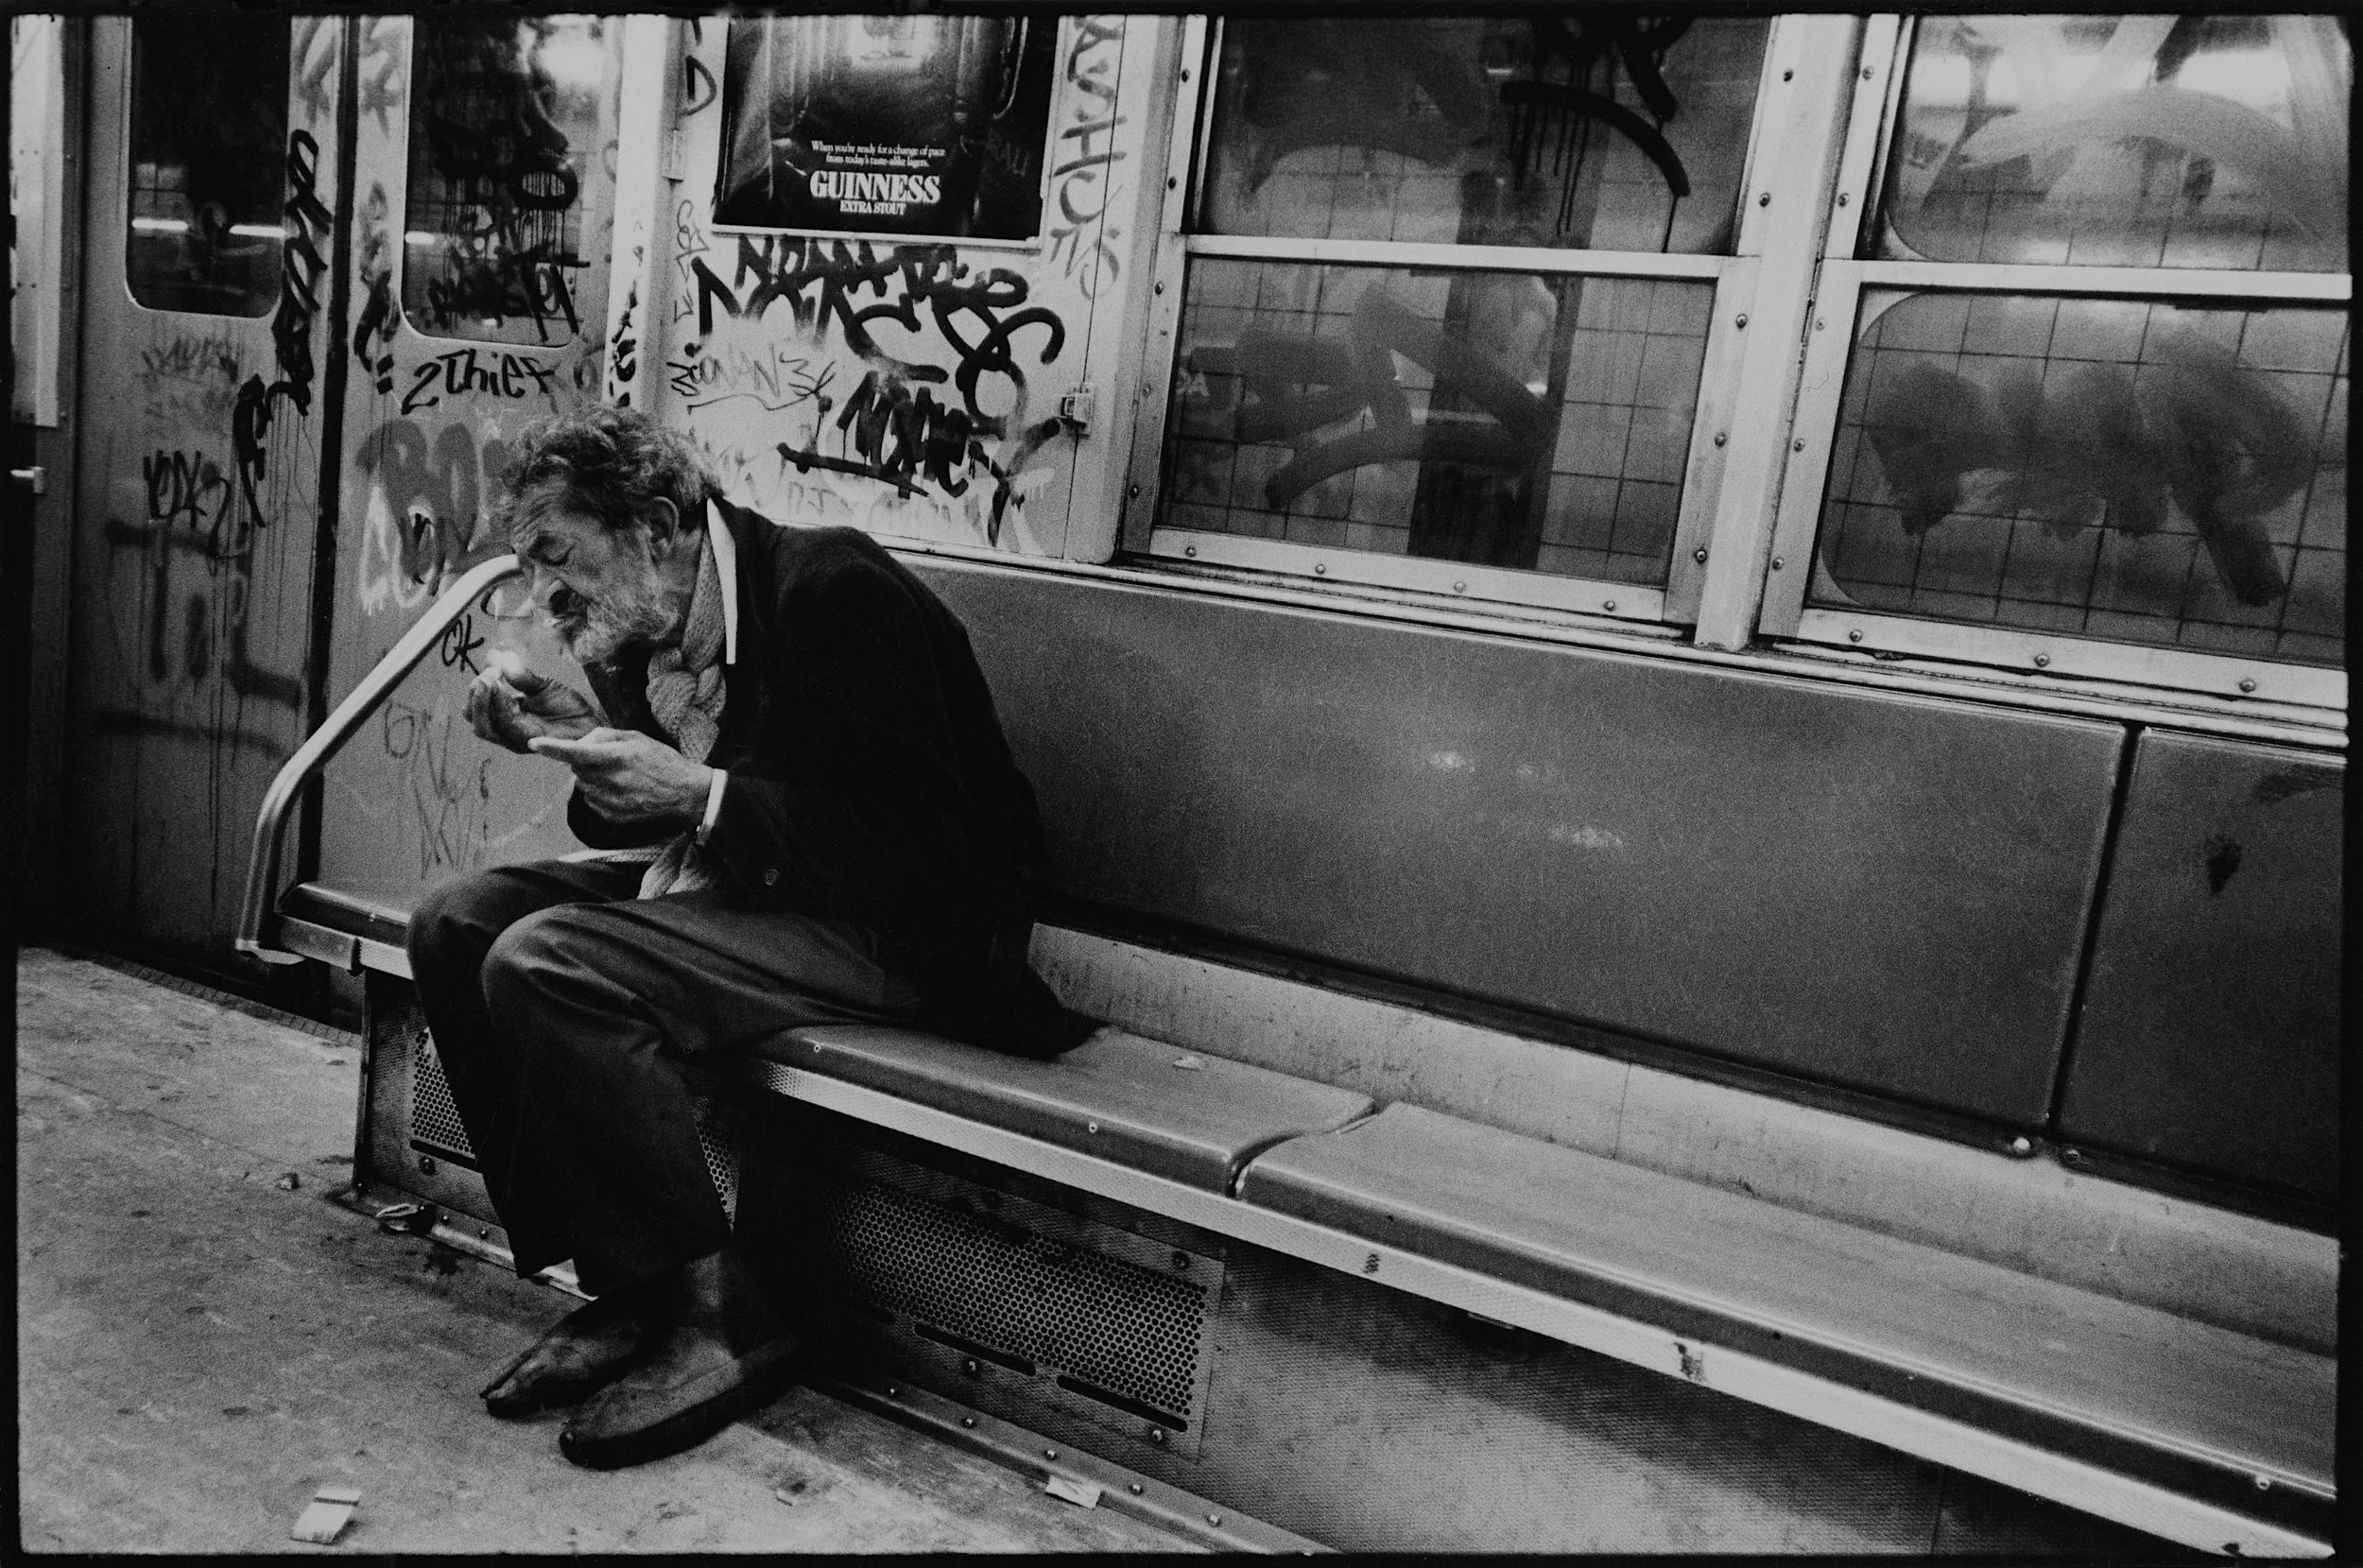 smoking a butt on the train, nyc, c. 1982